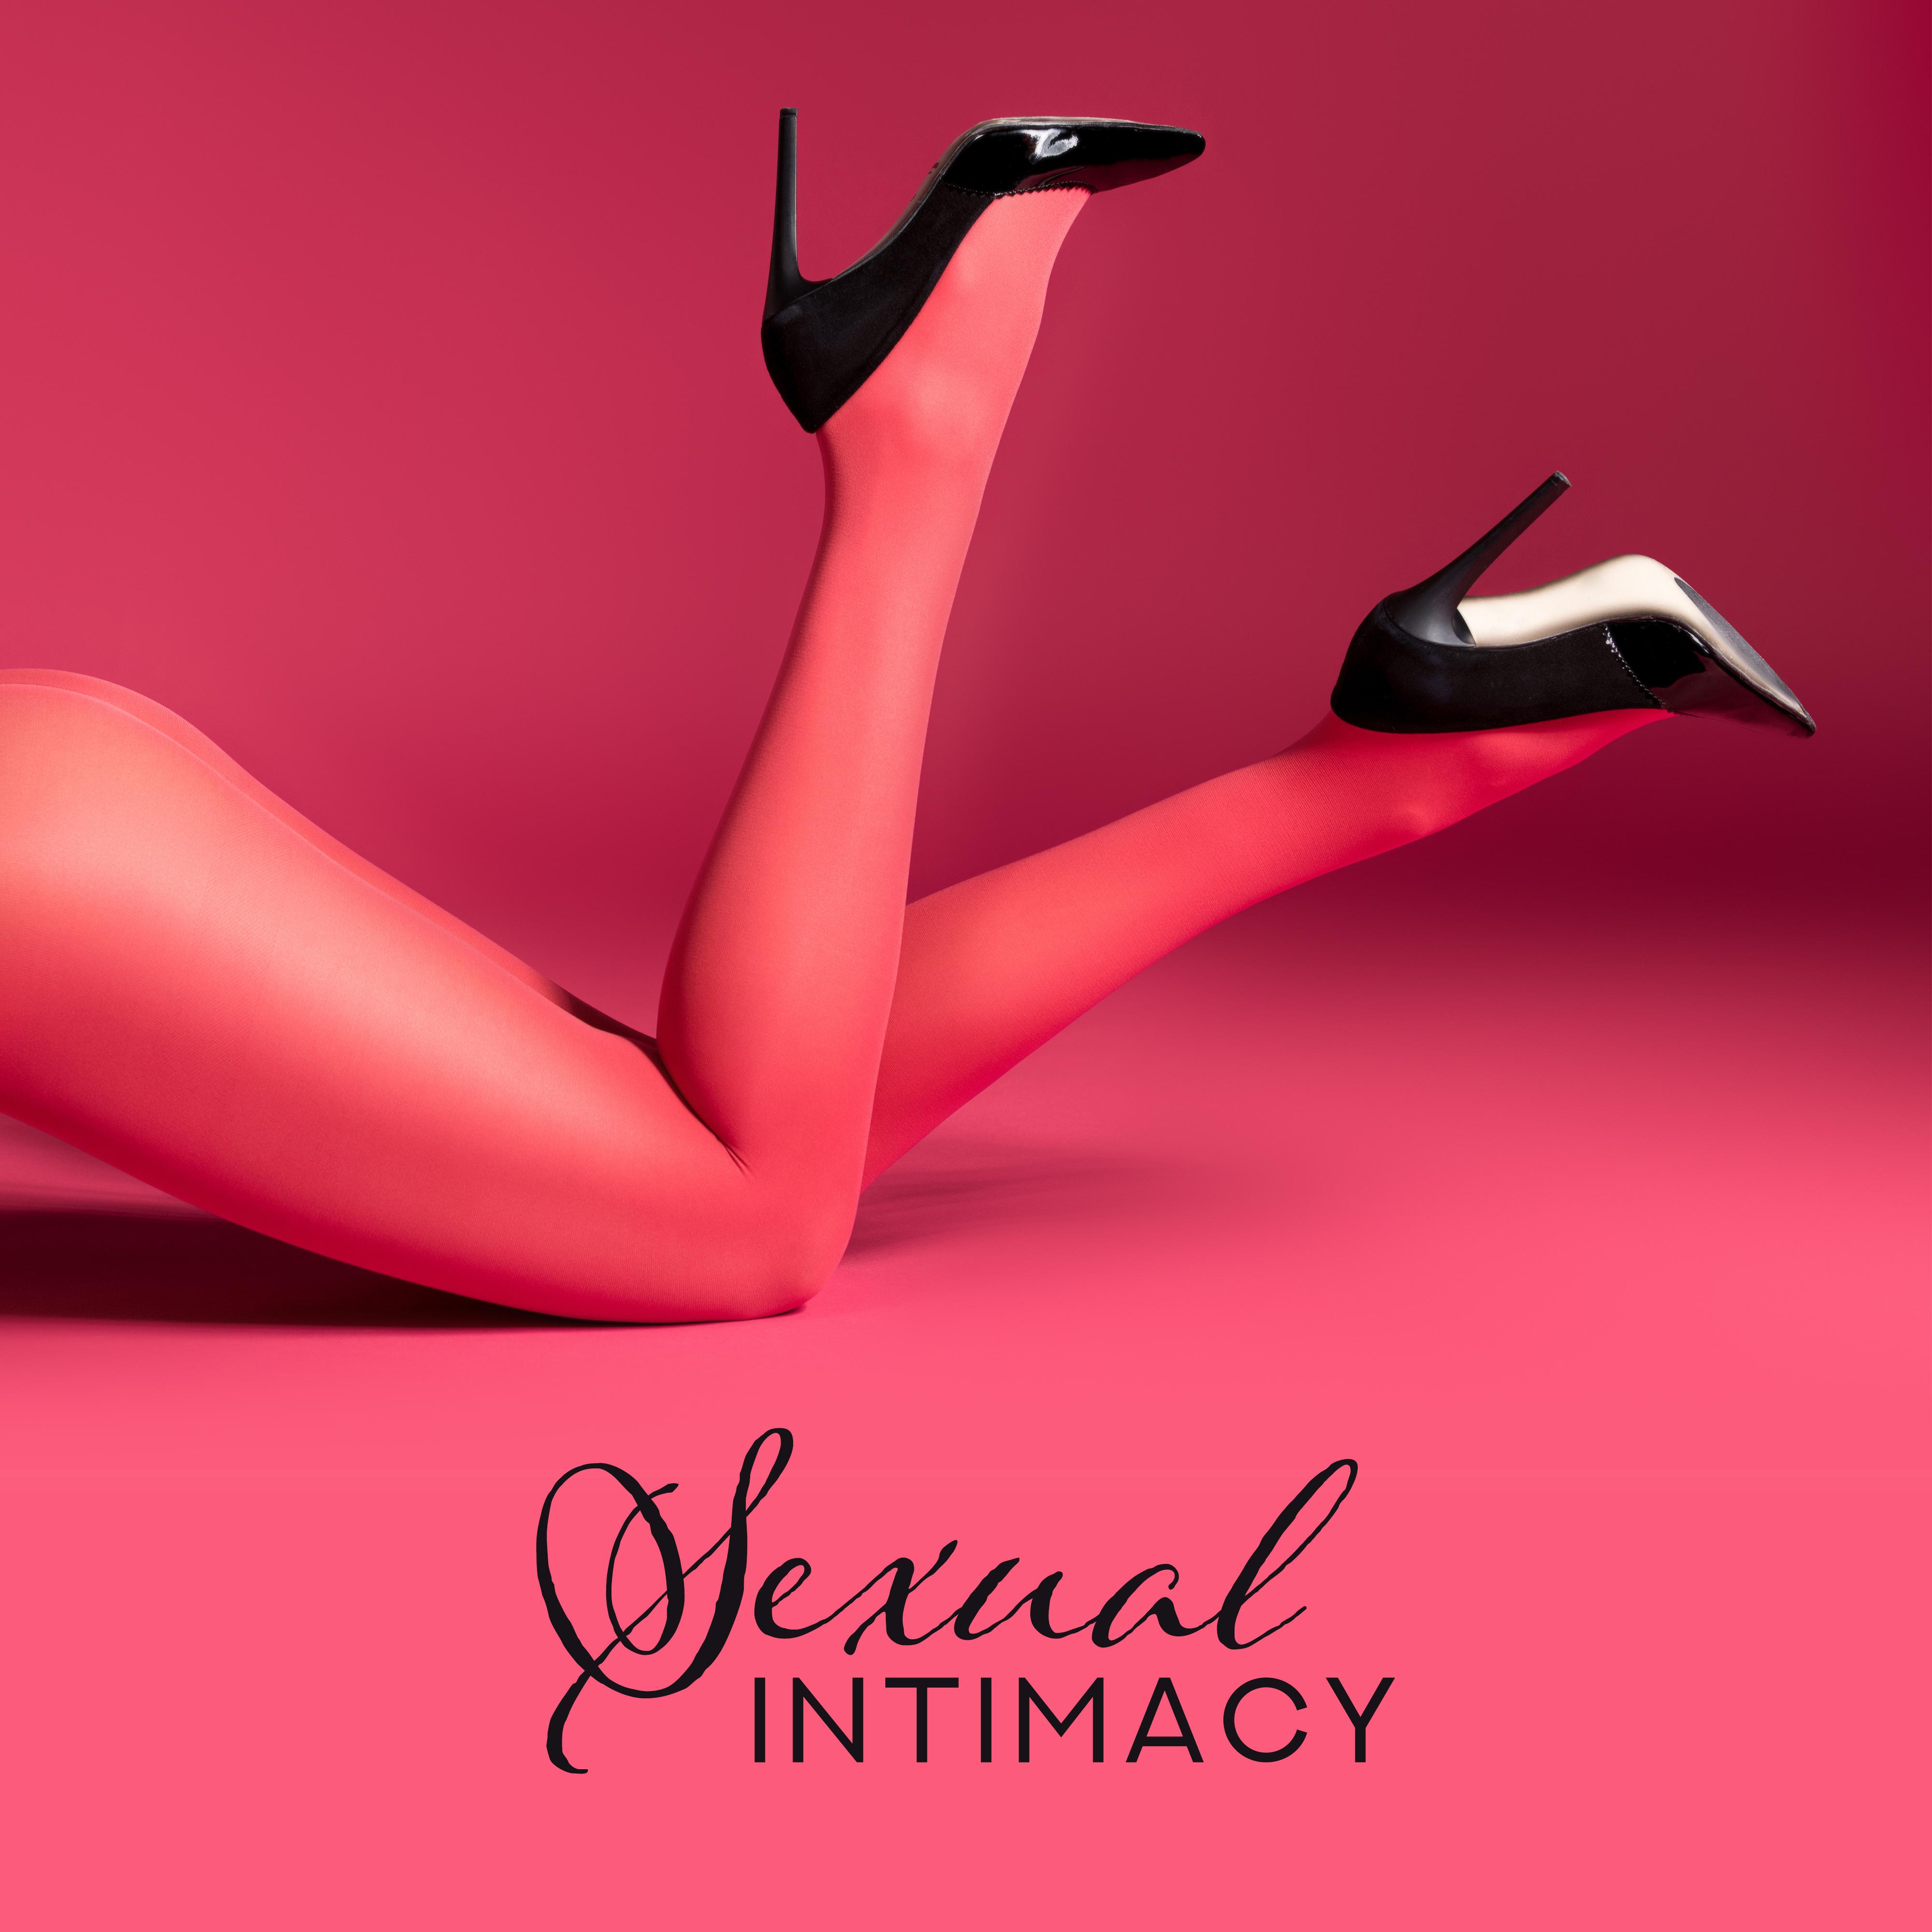 ****** Intimacy: **** Background Music for Moments of Love and Closeness with Your Partner